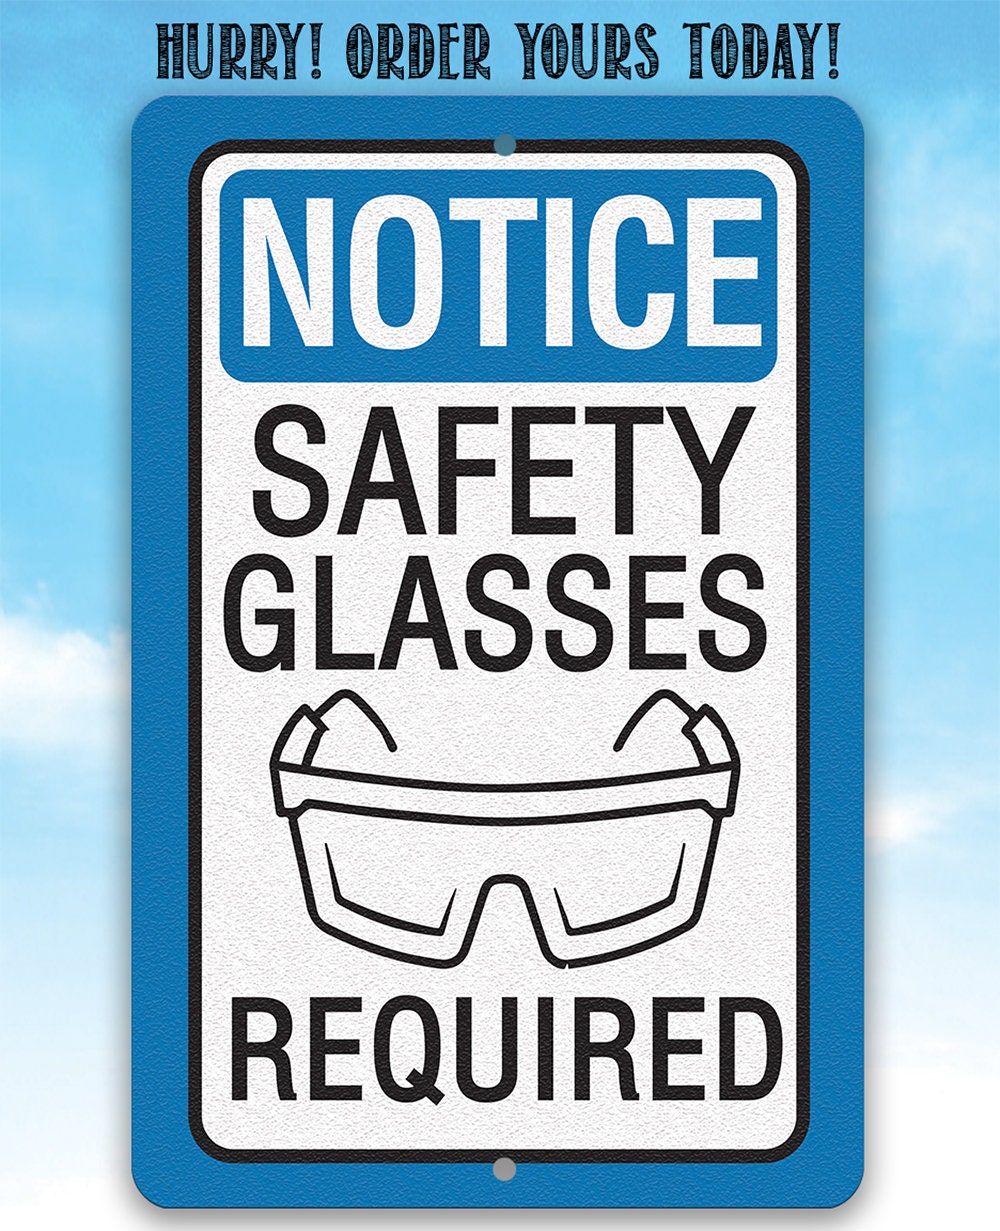 Notice, Safety Glasses Required - 8" x 12" or 12" x 18" Aluminum Tin Awesome Metal Poster Lone Star Art 